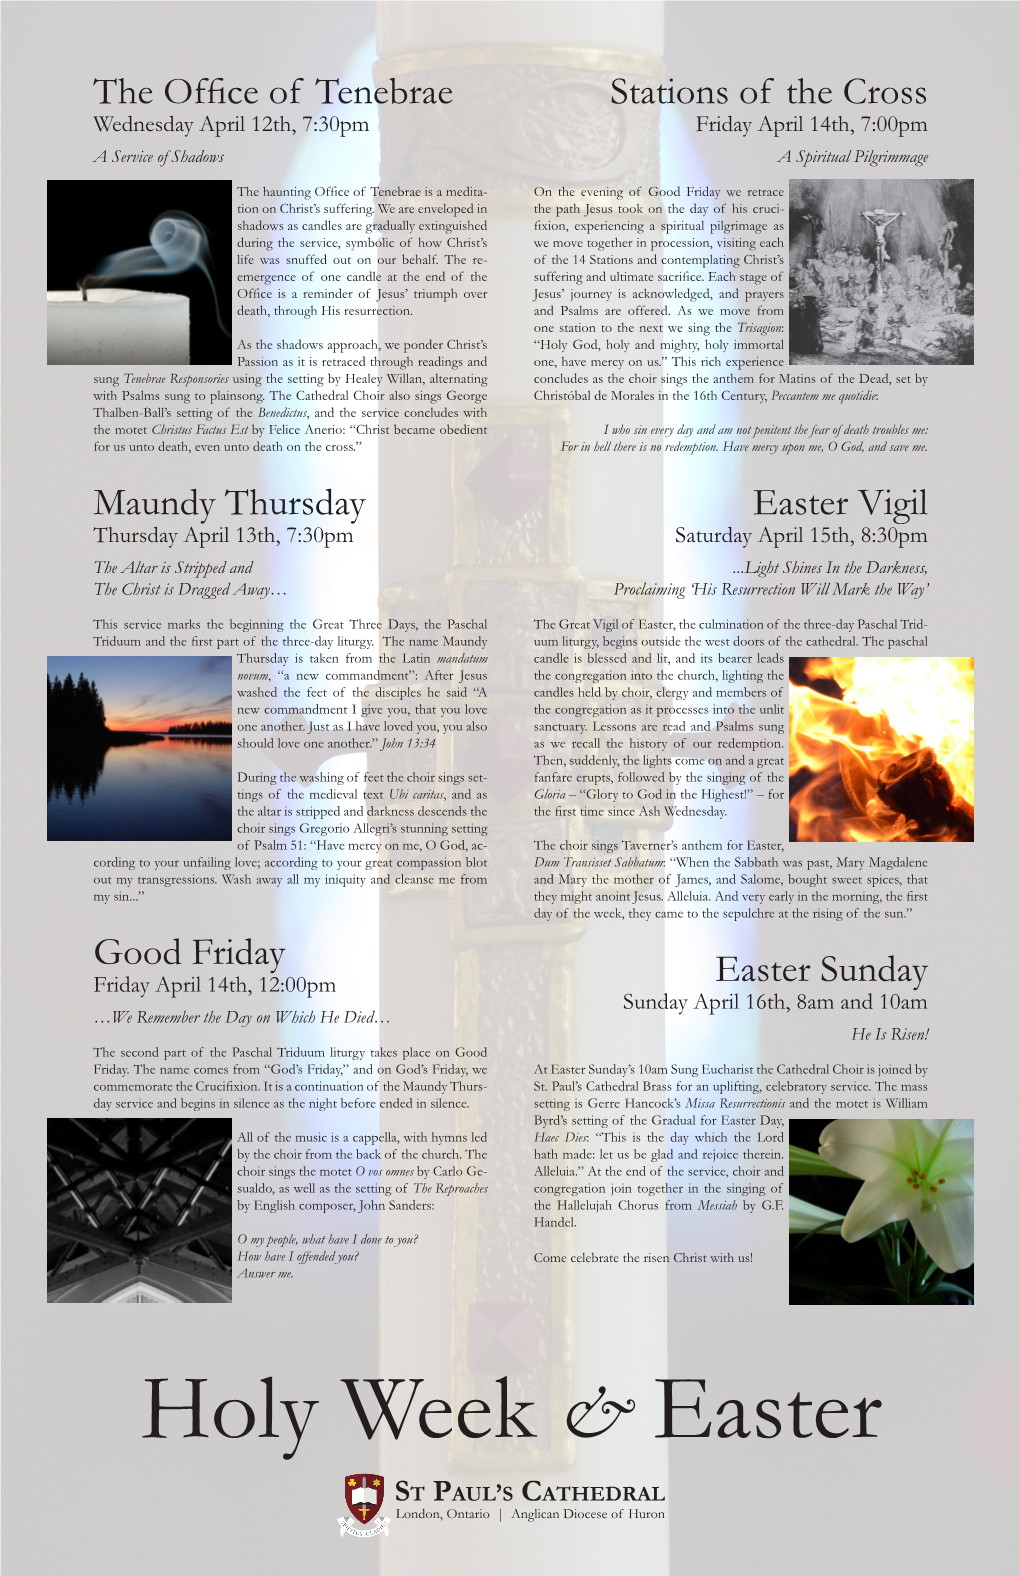 The Office of Tenebrae Maundy Thursday Good Friday Stations Of